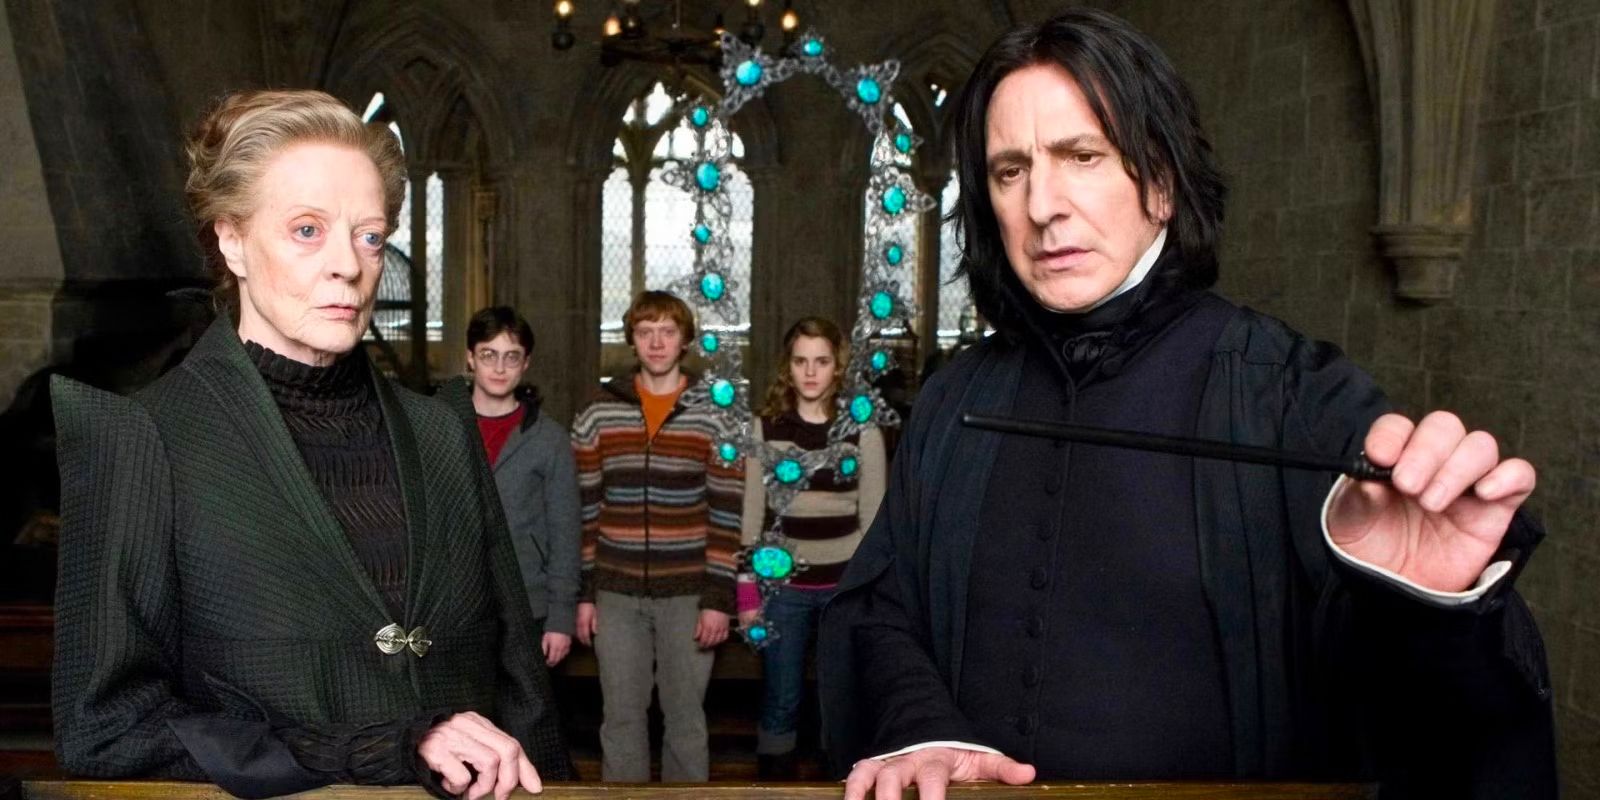 Professor McGonagall and Professor Snape inspect a cursed object before Harry, Ron, and Hermione